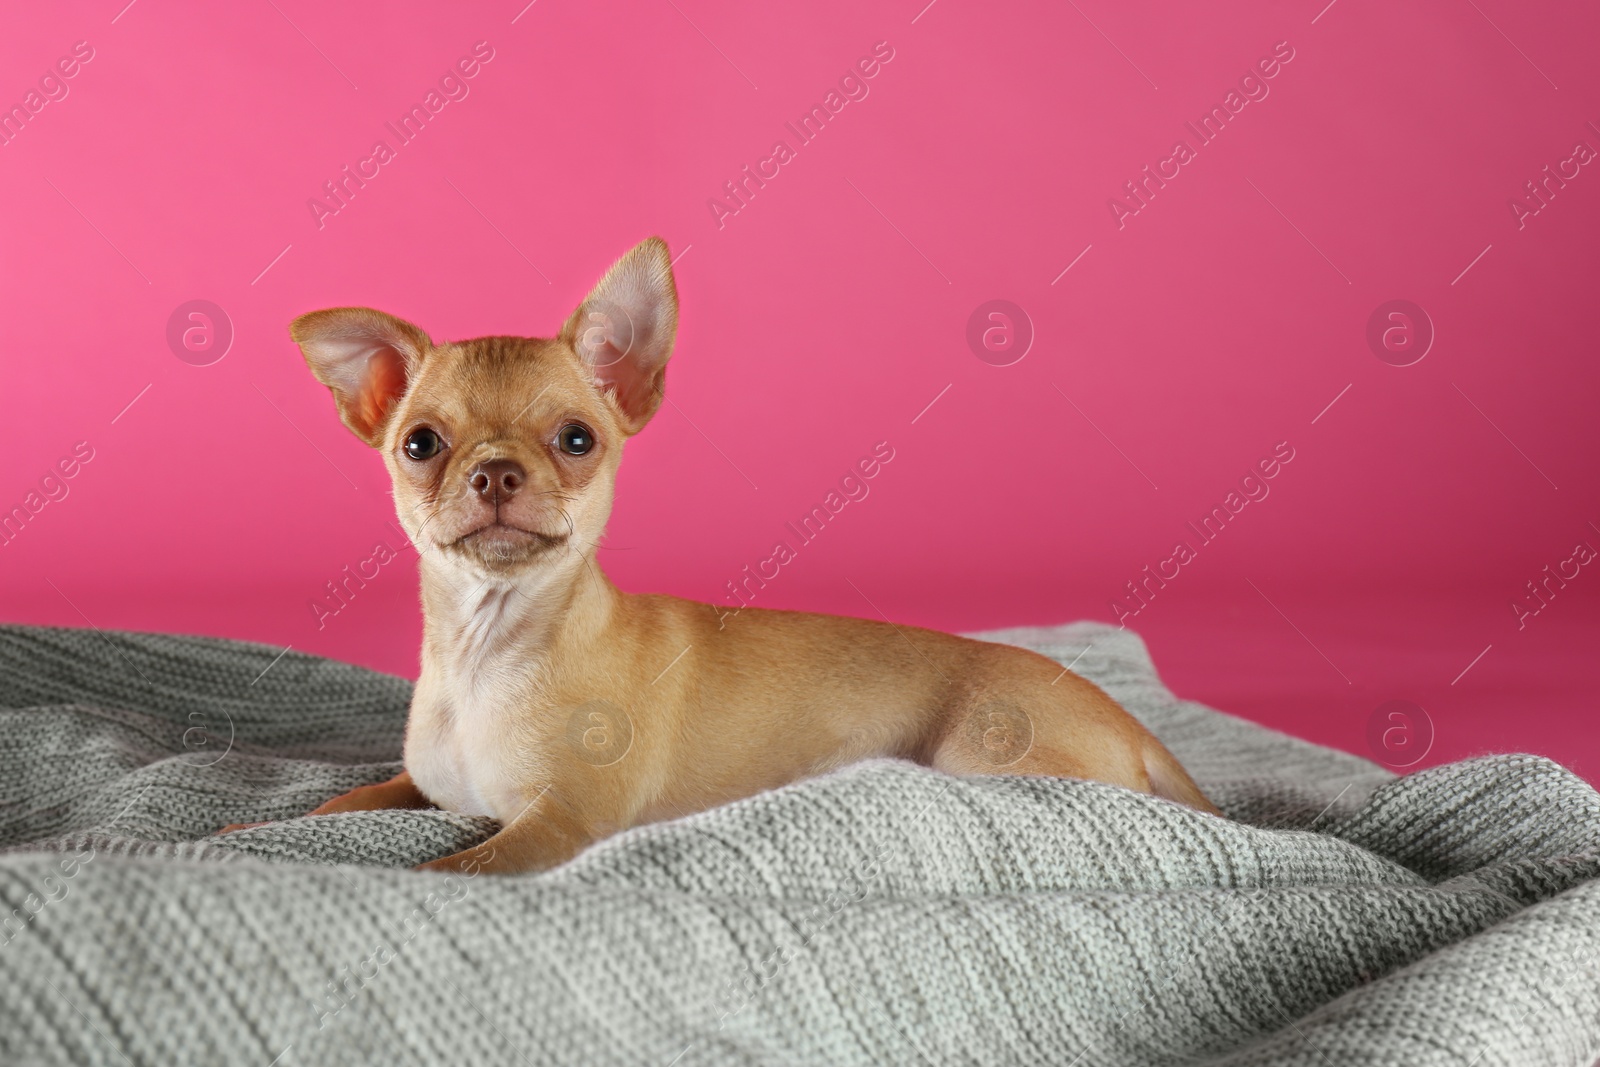 Photo of Cute Chihuahua puppy on blanket. Baby animal